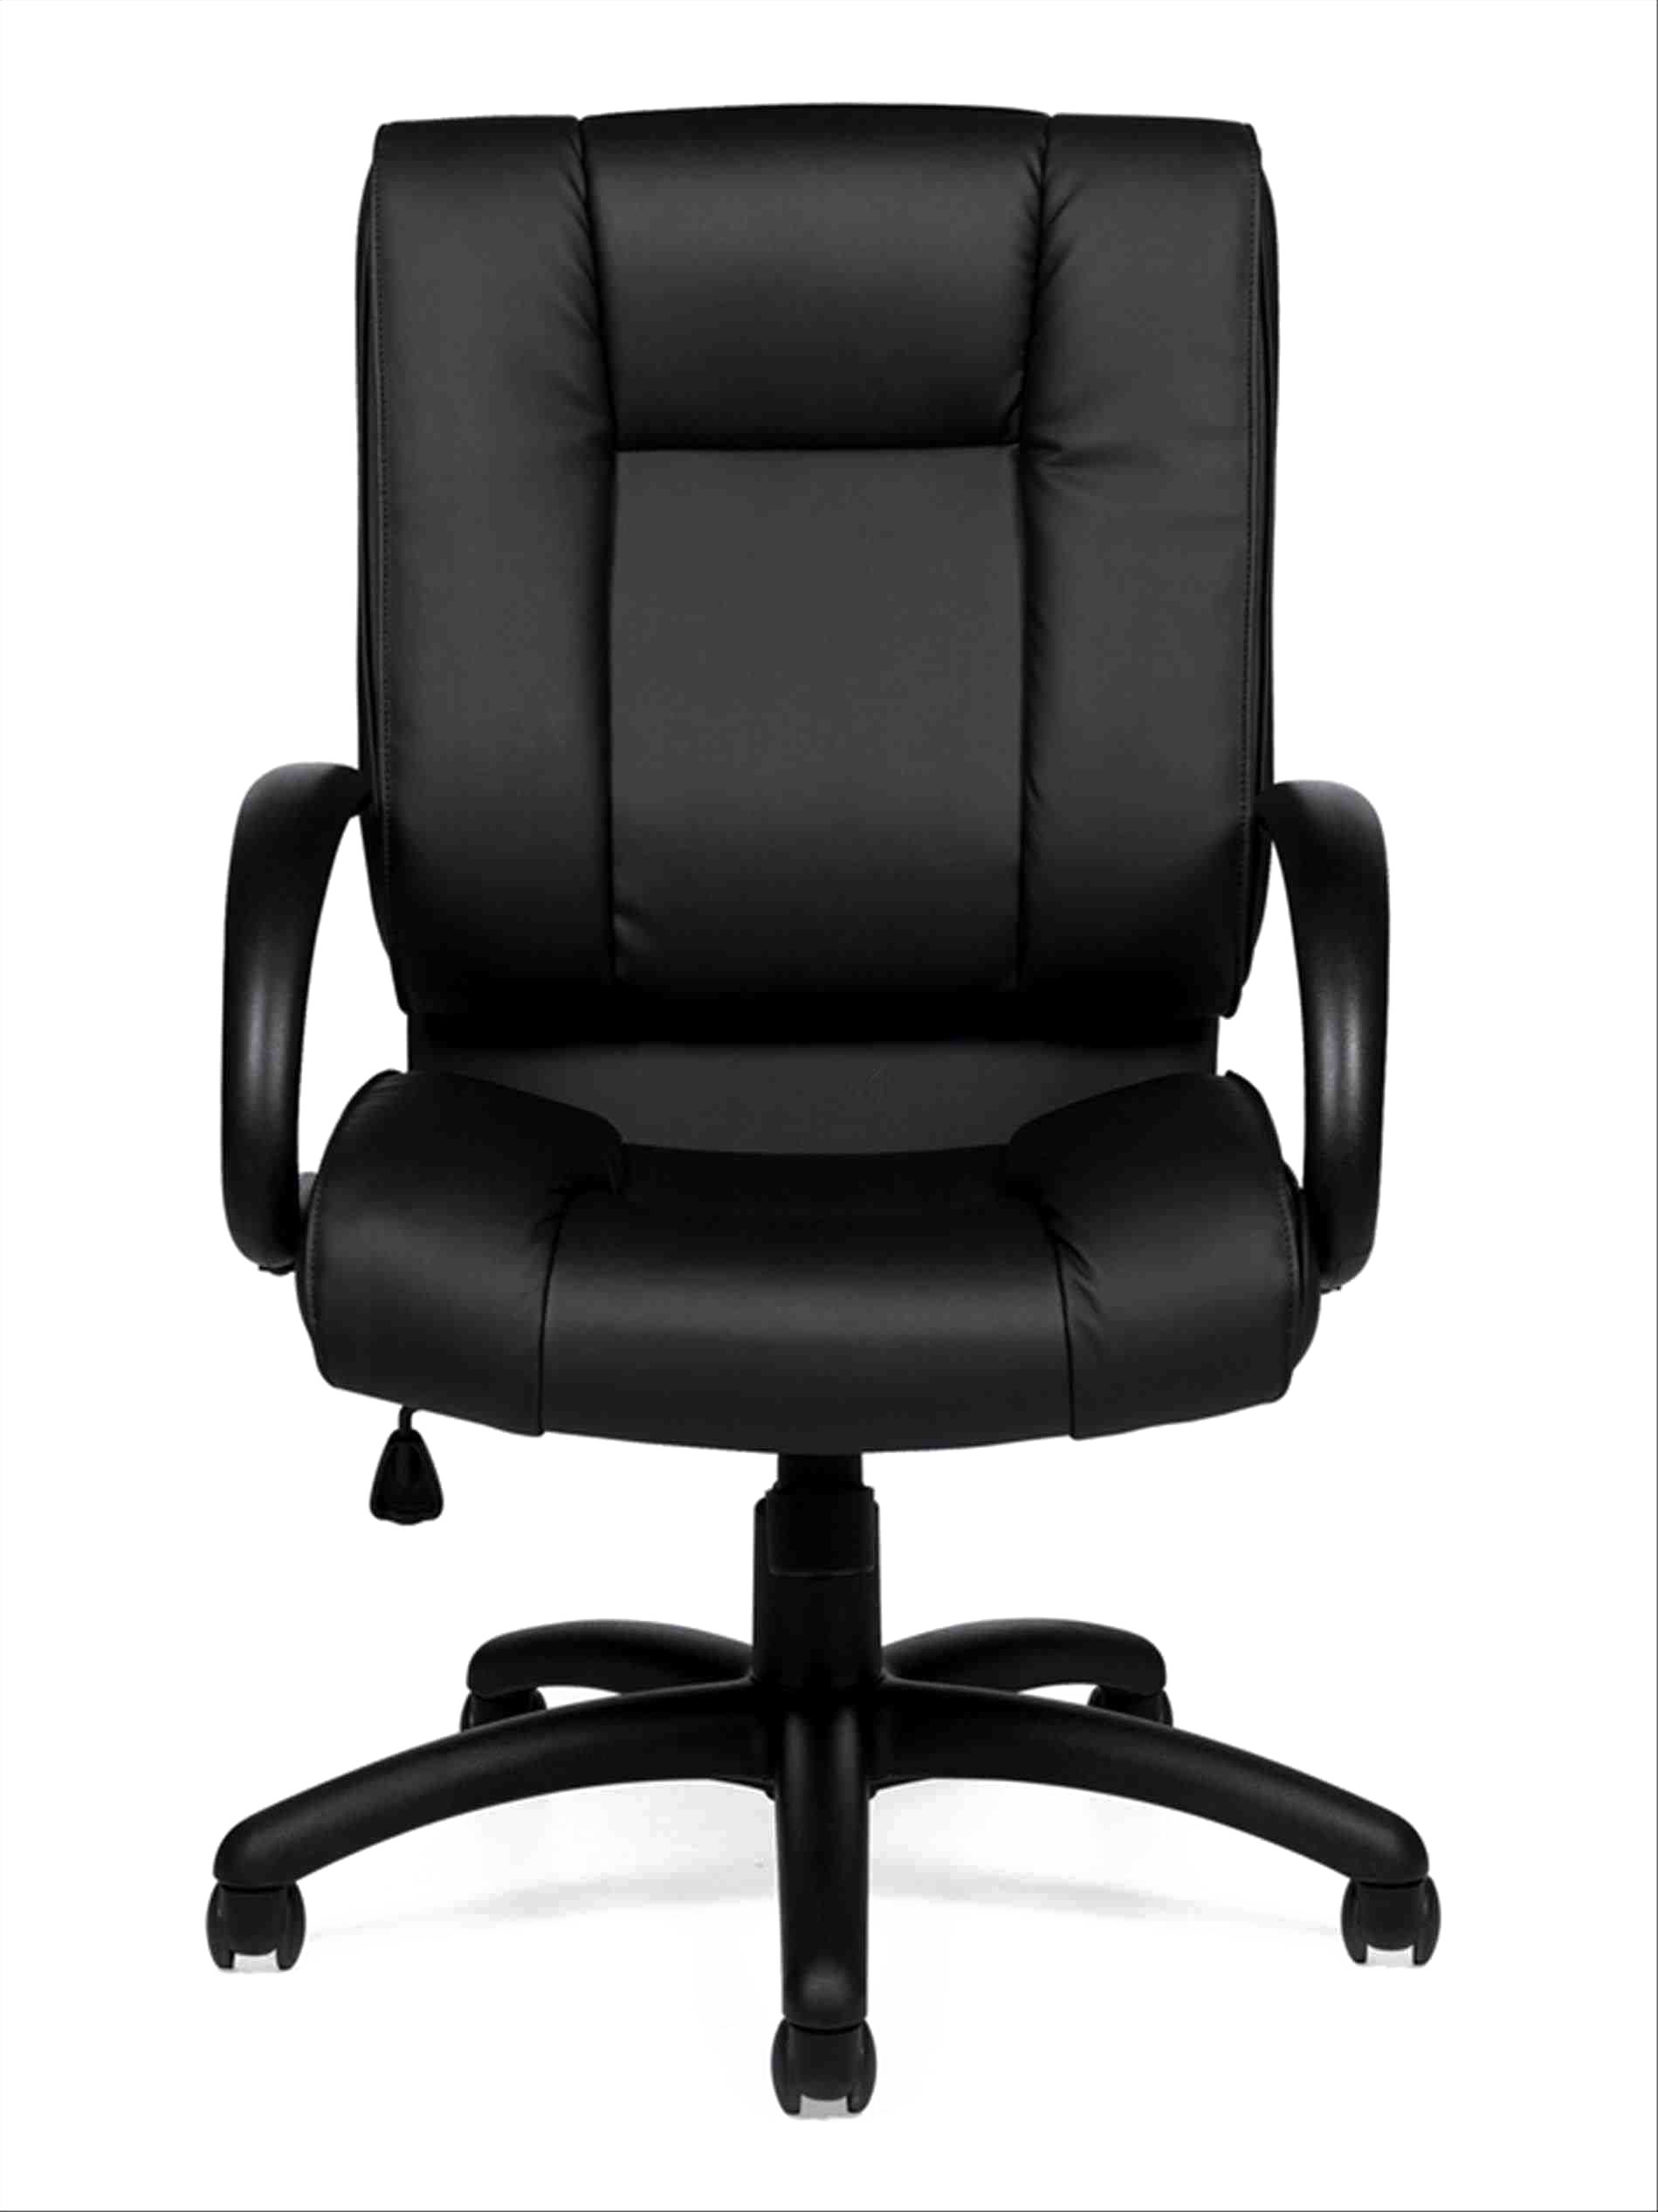 Download PNG image - Office Chair PNG Transparent Image 